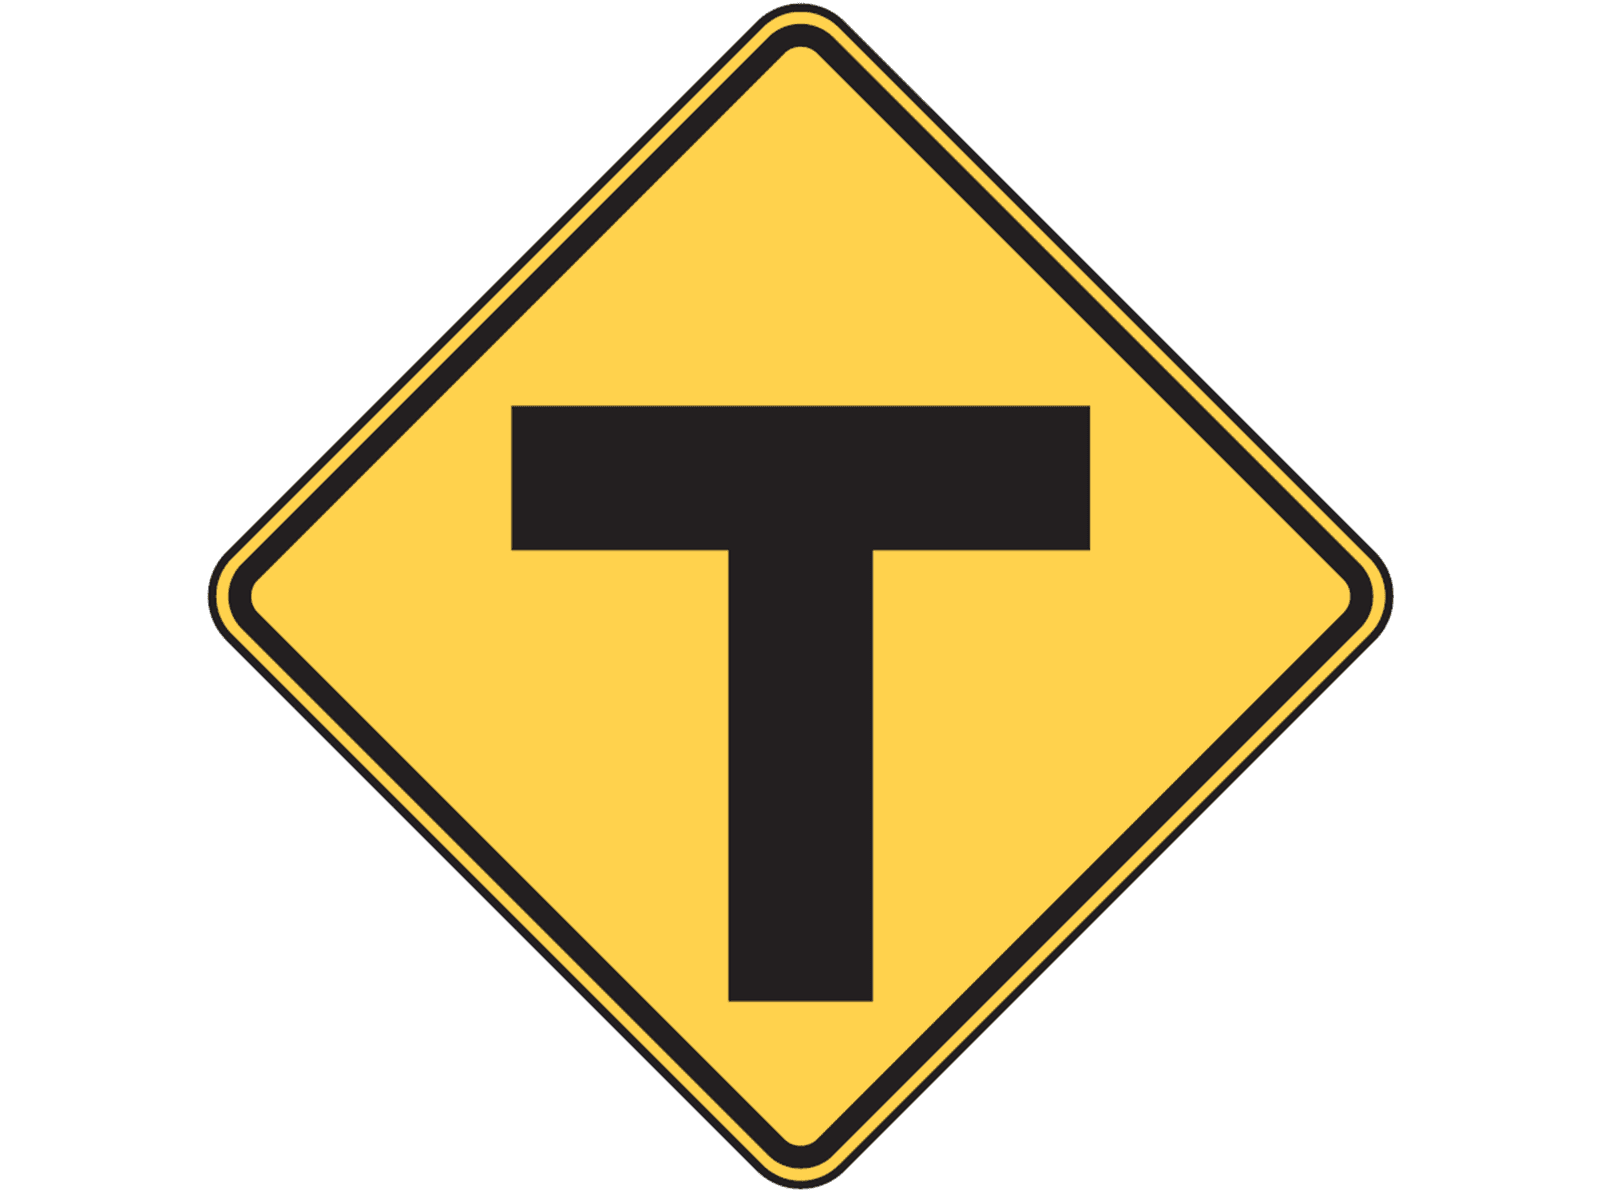 T Intersection W2-4 - W2: Intersections